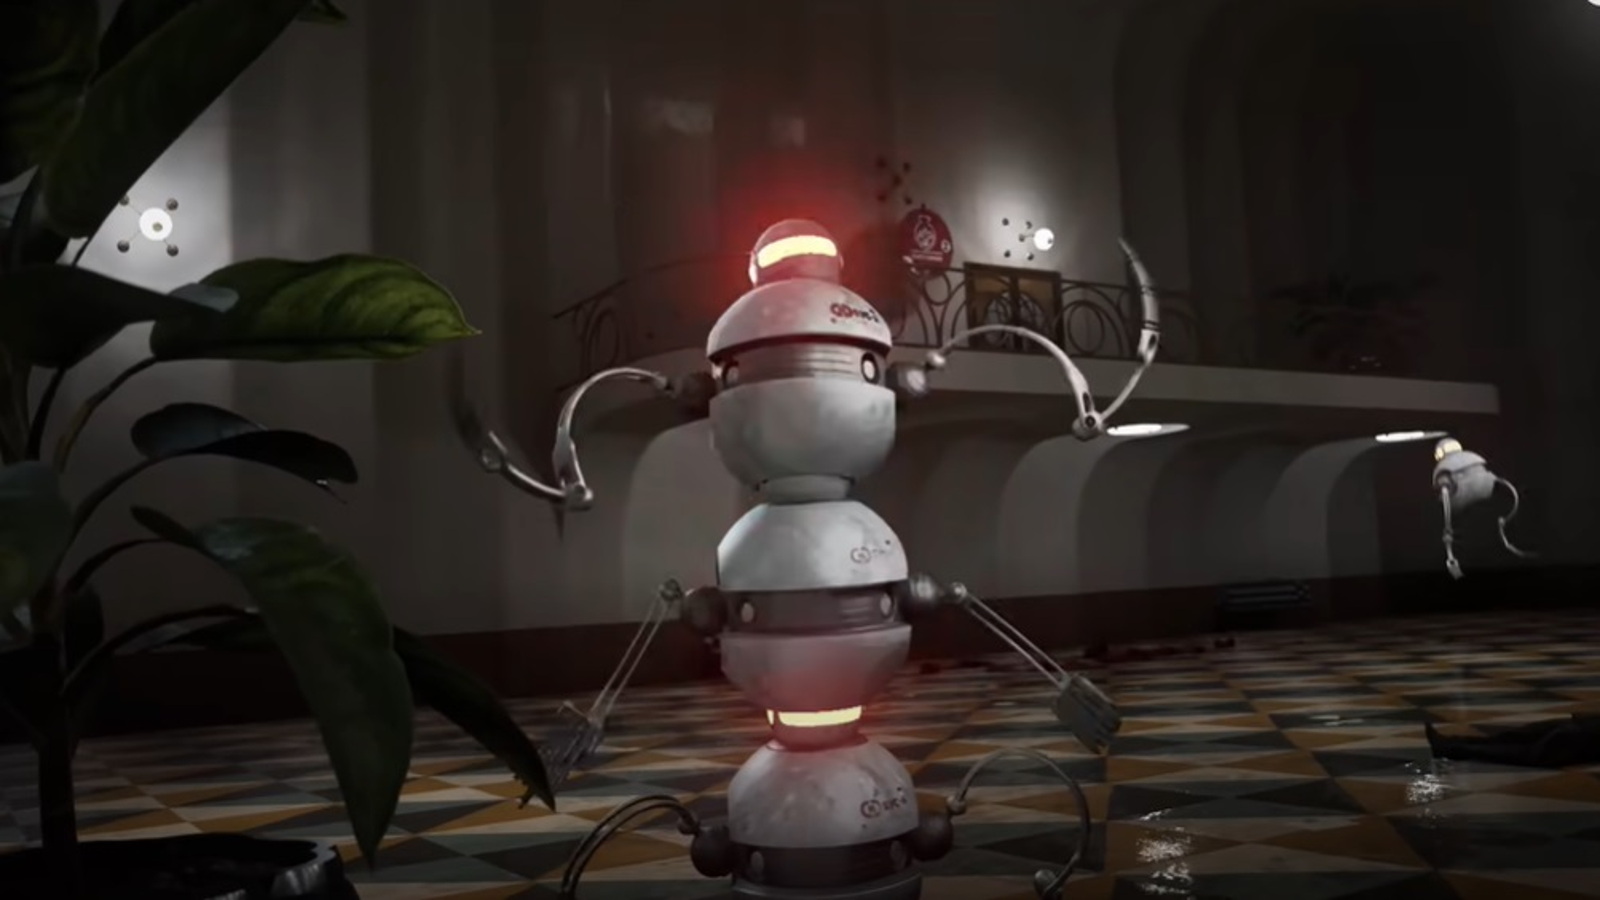 Atomic Heart – BEA-D Robot Revealed in New Teaser for First DLC